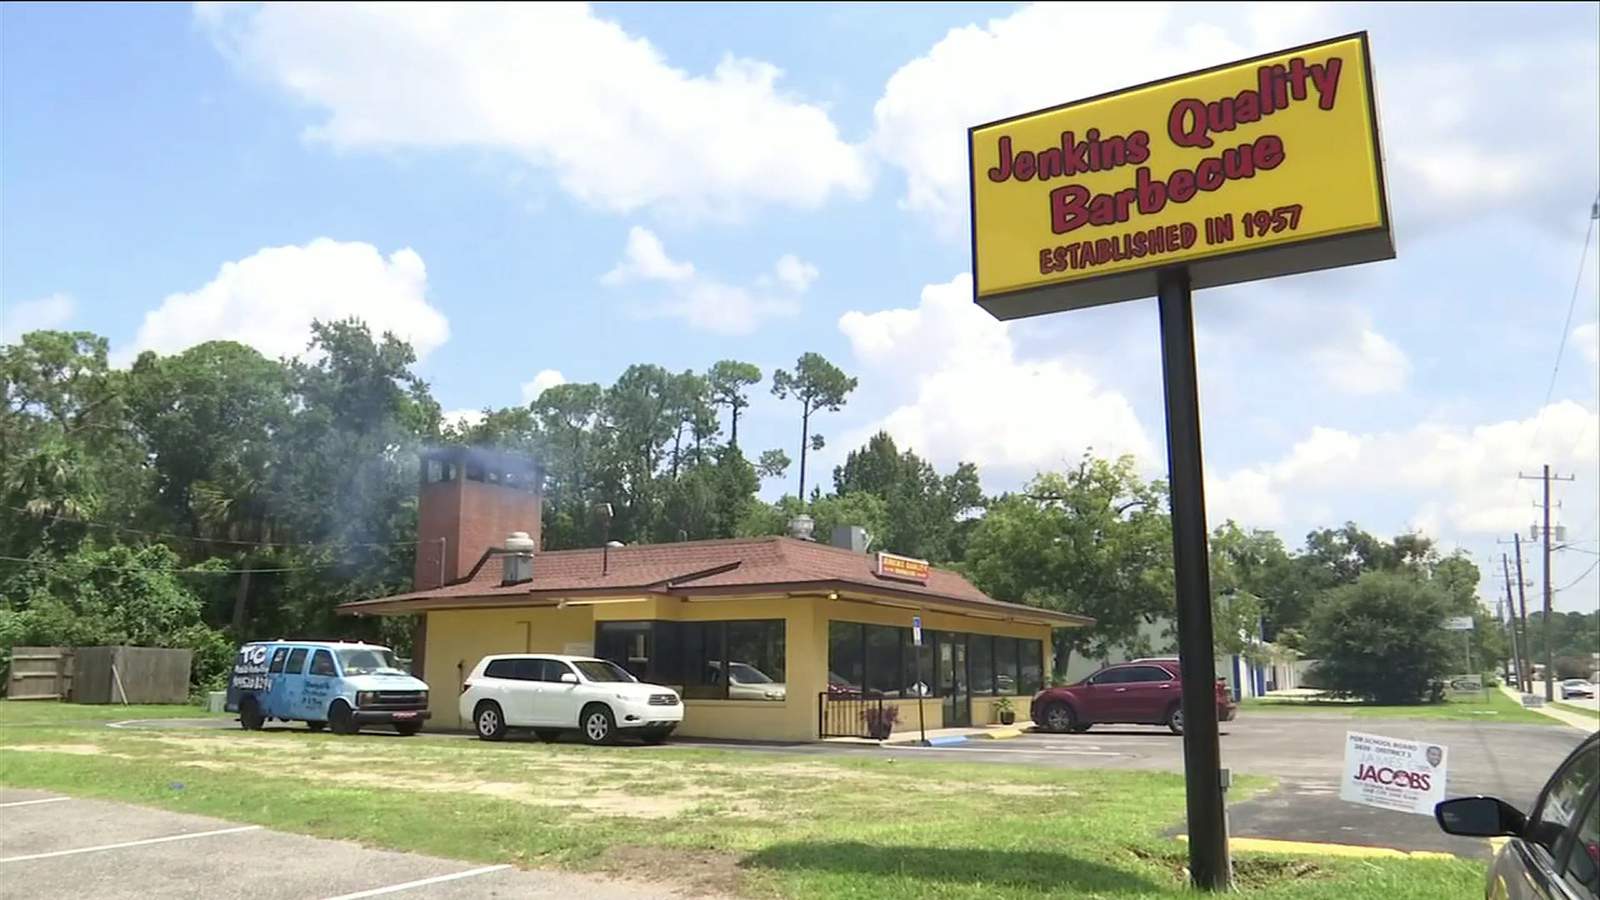 This Jacksonville barbecue institution has been serving ribs, chicken for more than 60 years